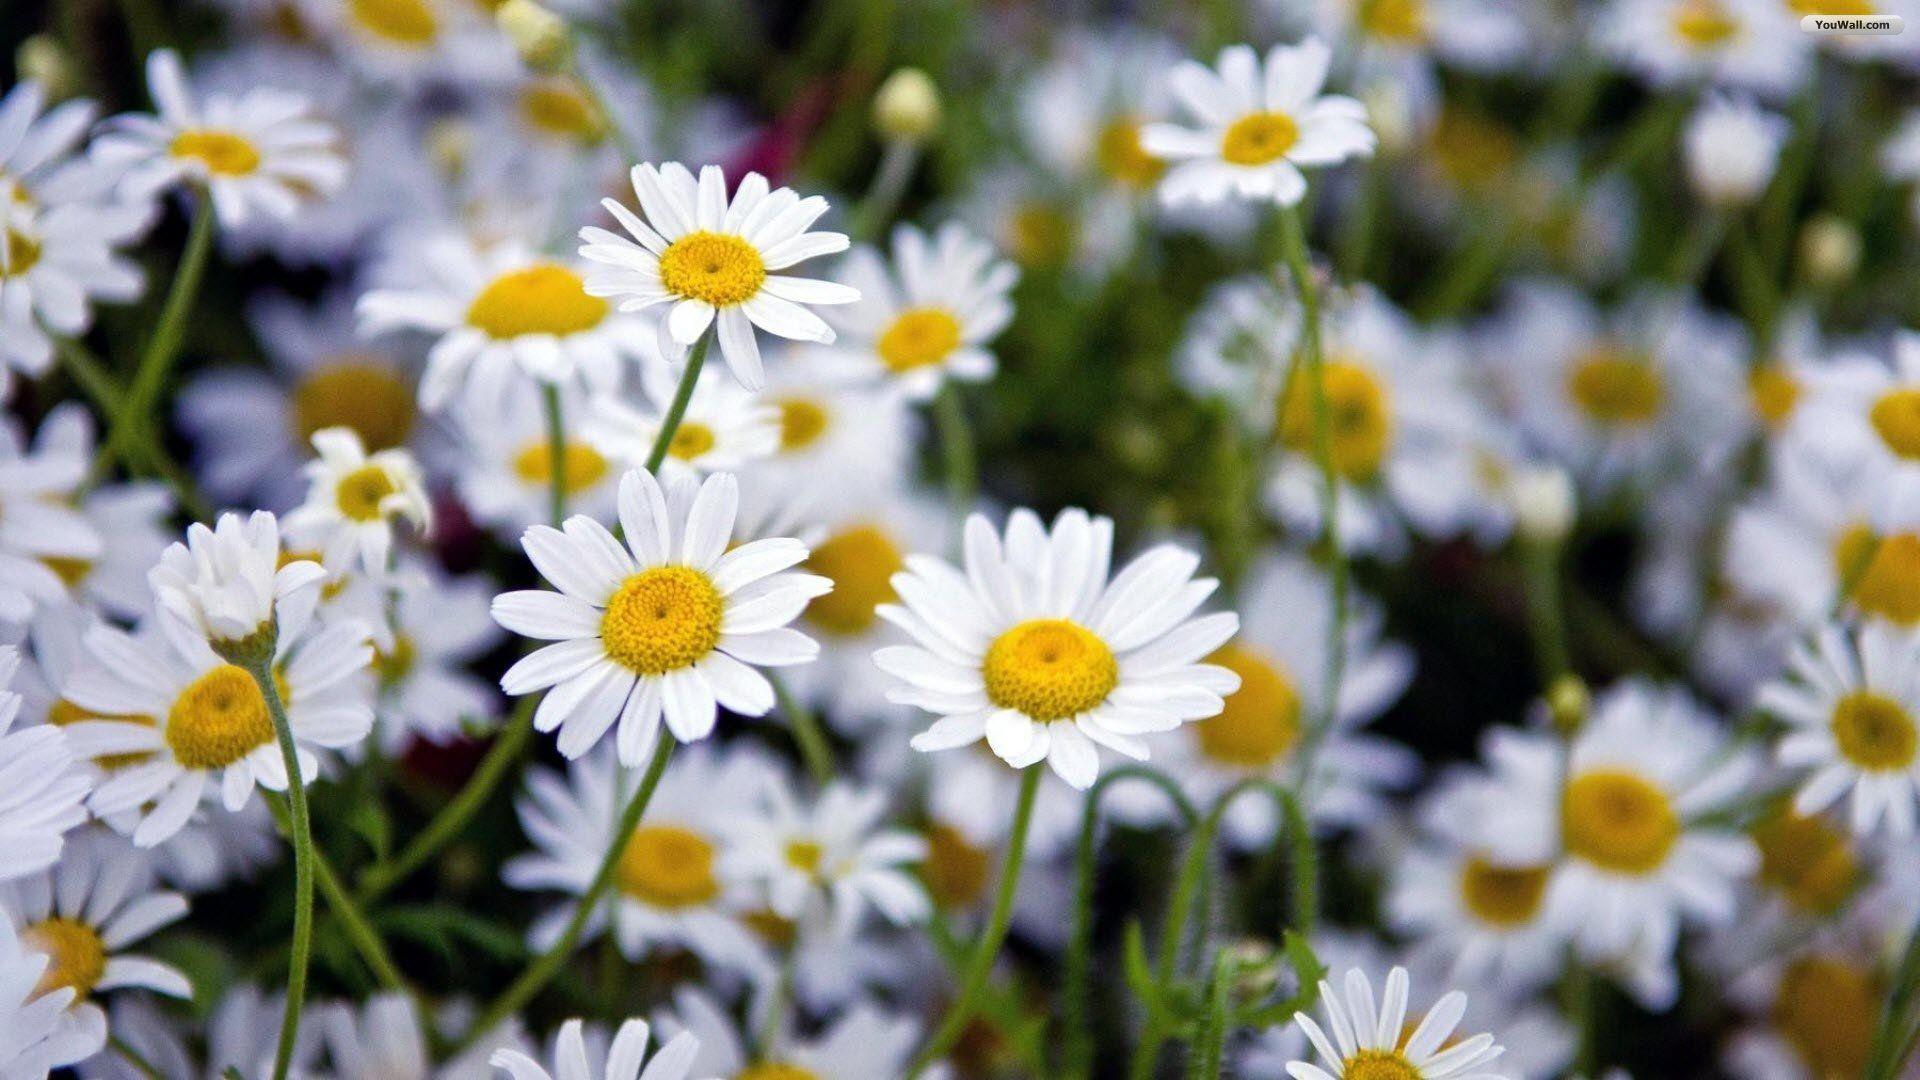 Daisies Wallpaper, Daisies High Quality #KZ645 Mobile And Desktop